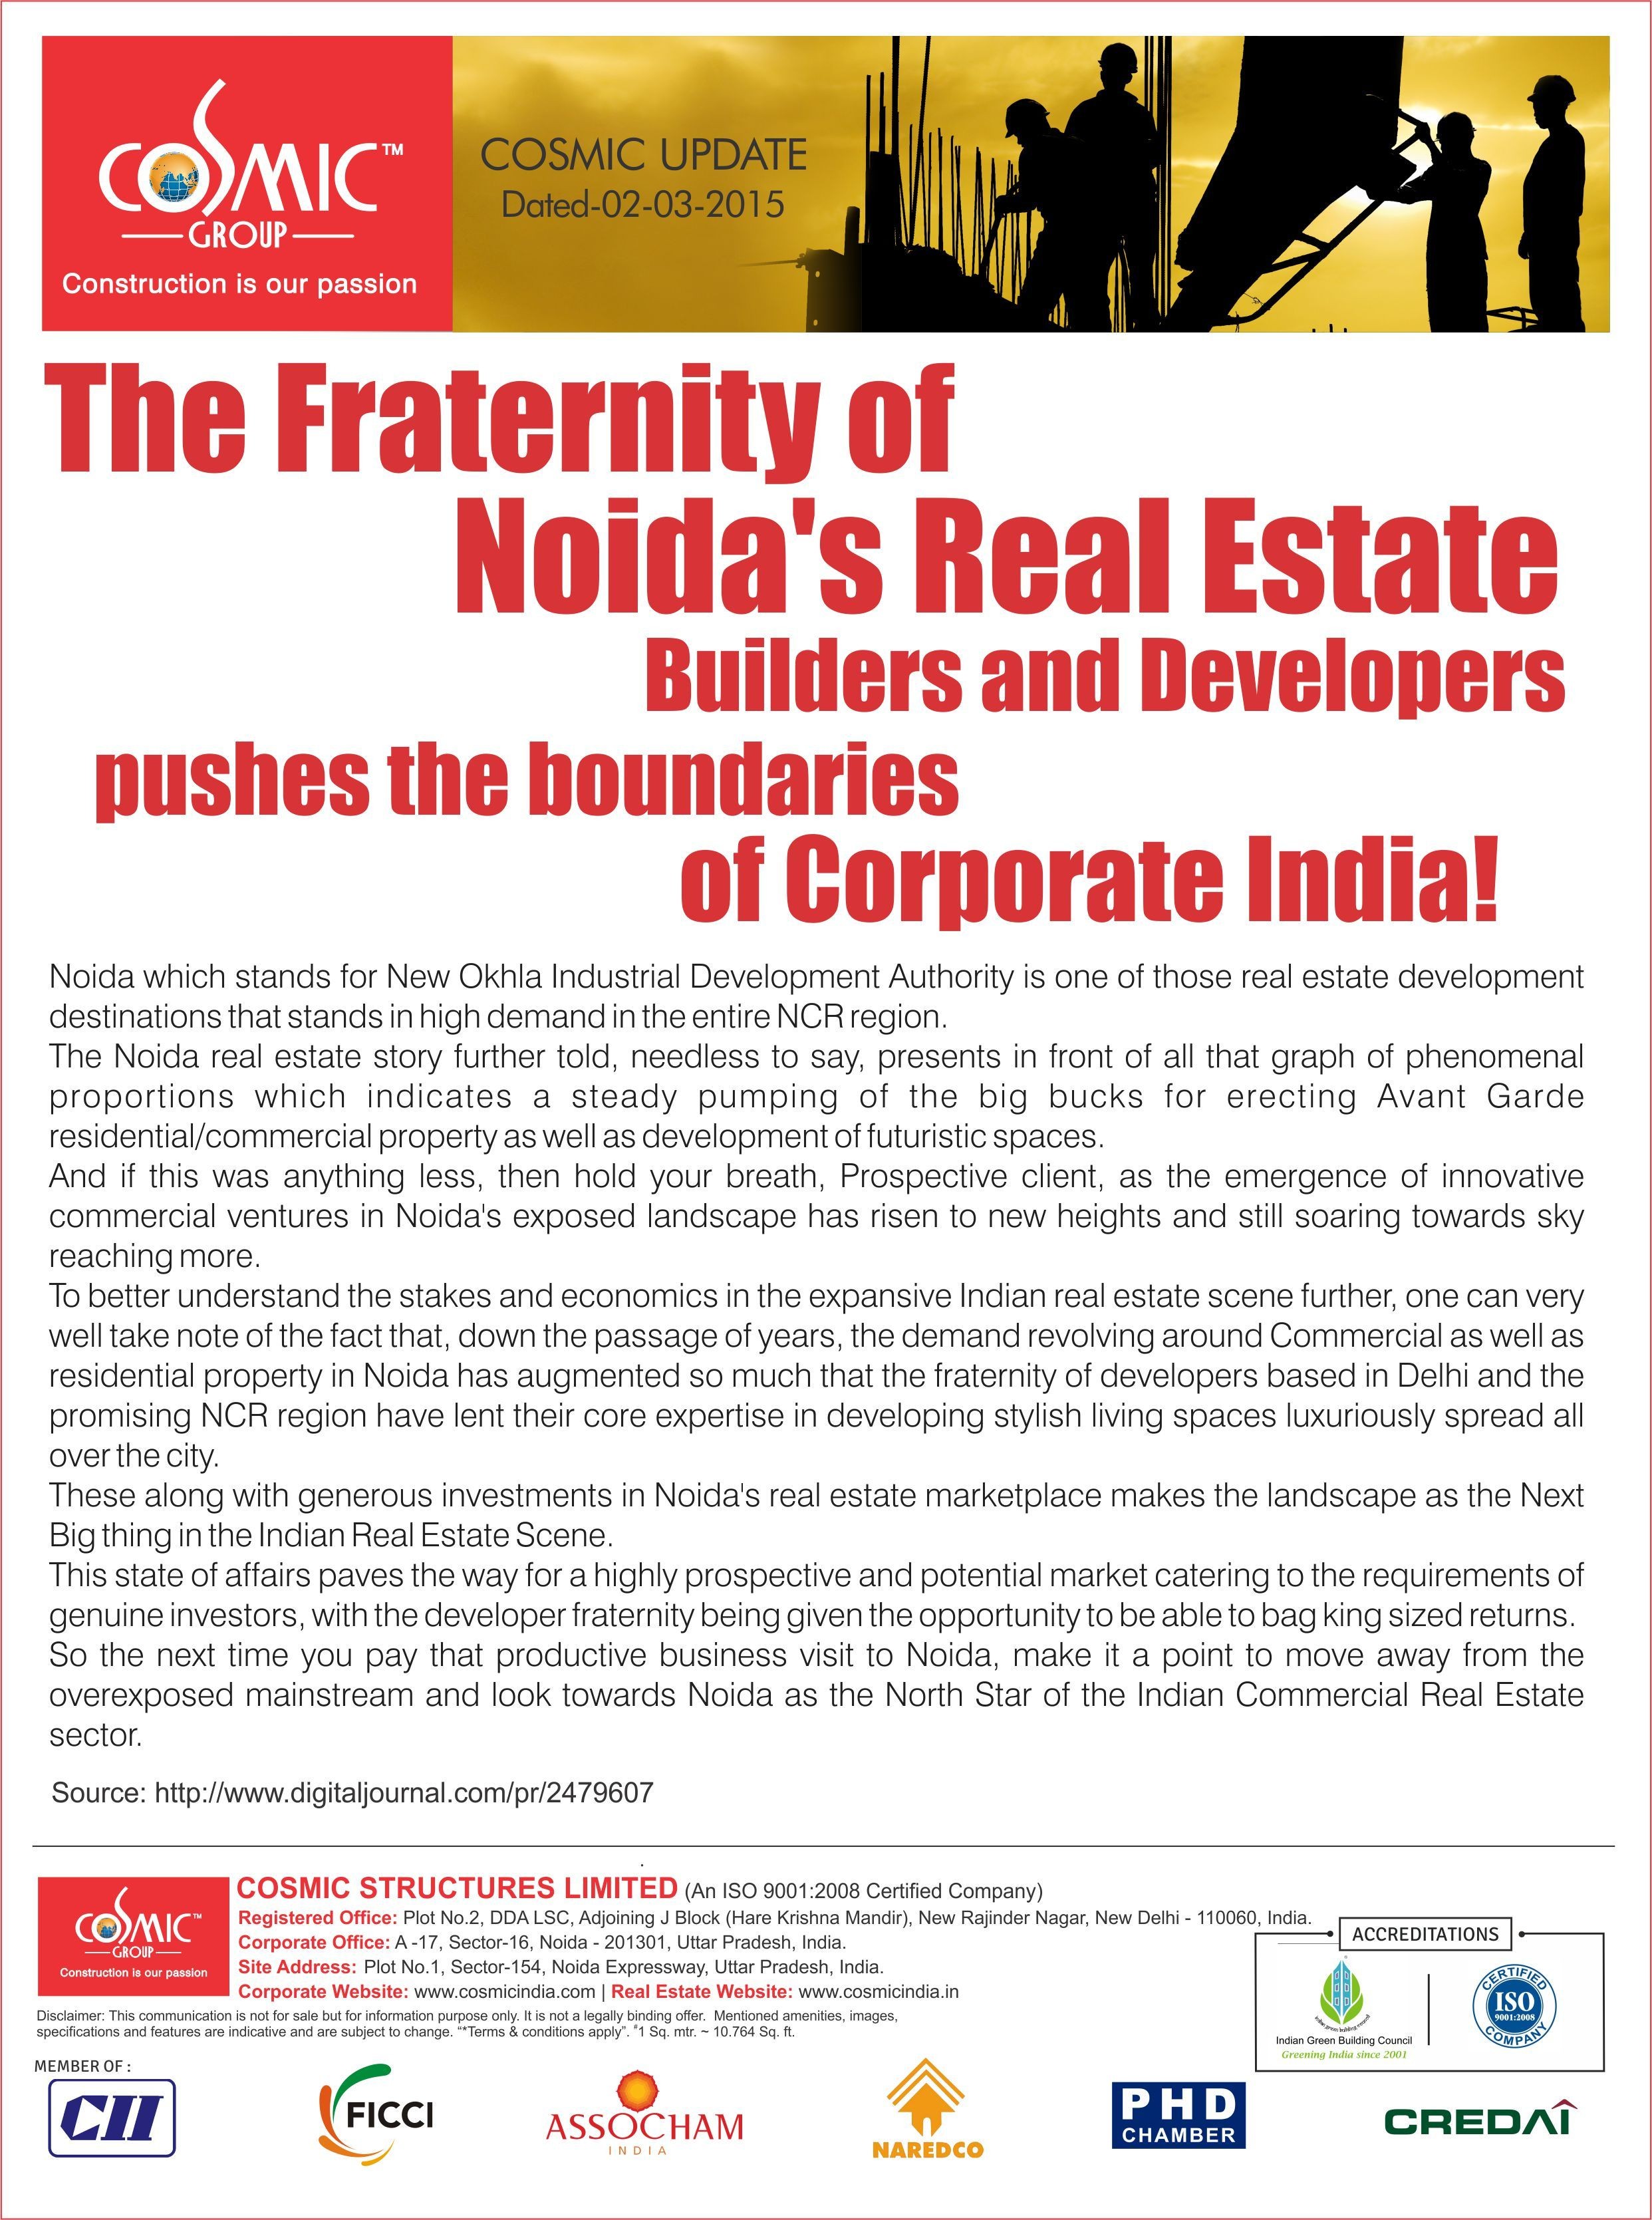 The Fraternity of Noida s Builders and Developers pushes the boundary of Corporate India Noida which